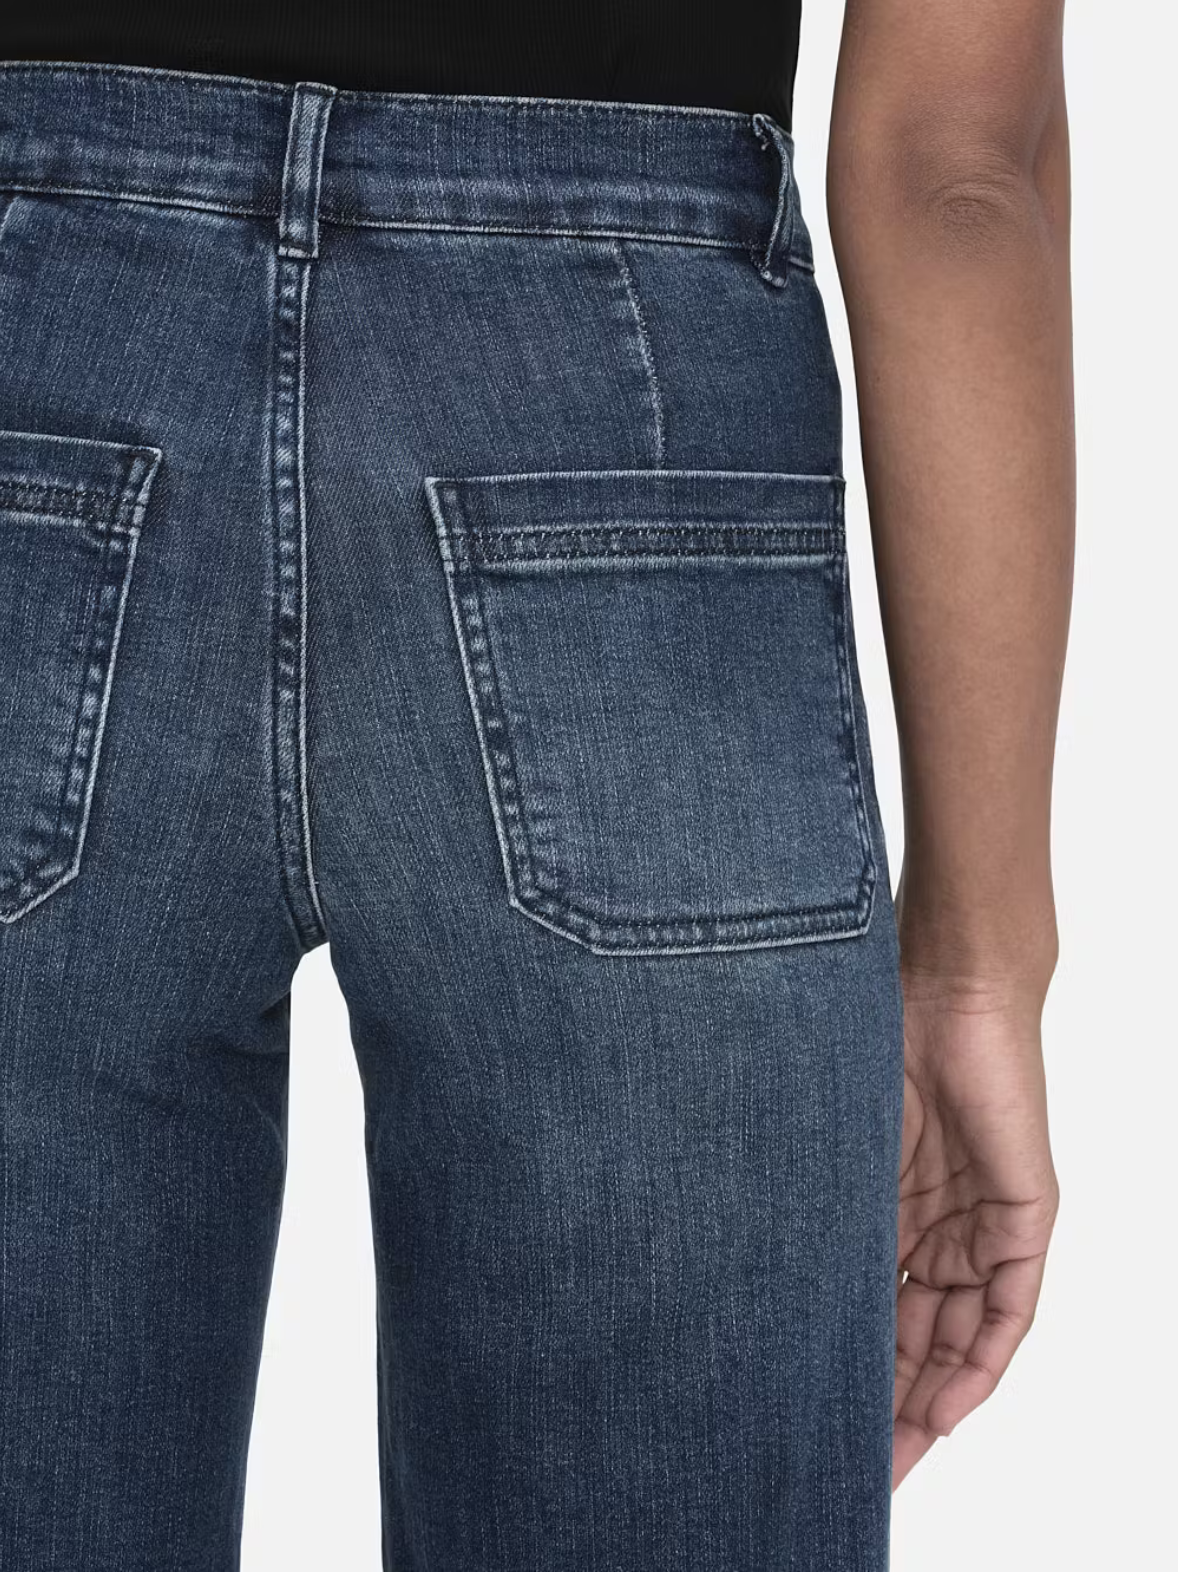 Model wears wide leg jeans in a dark wash. Features front pockets. Close up back view.